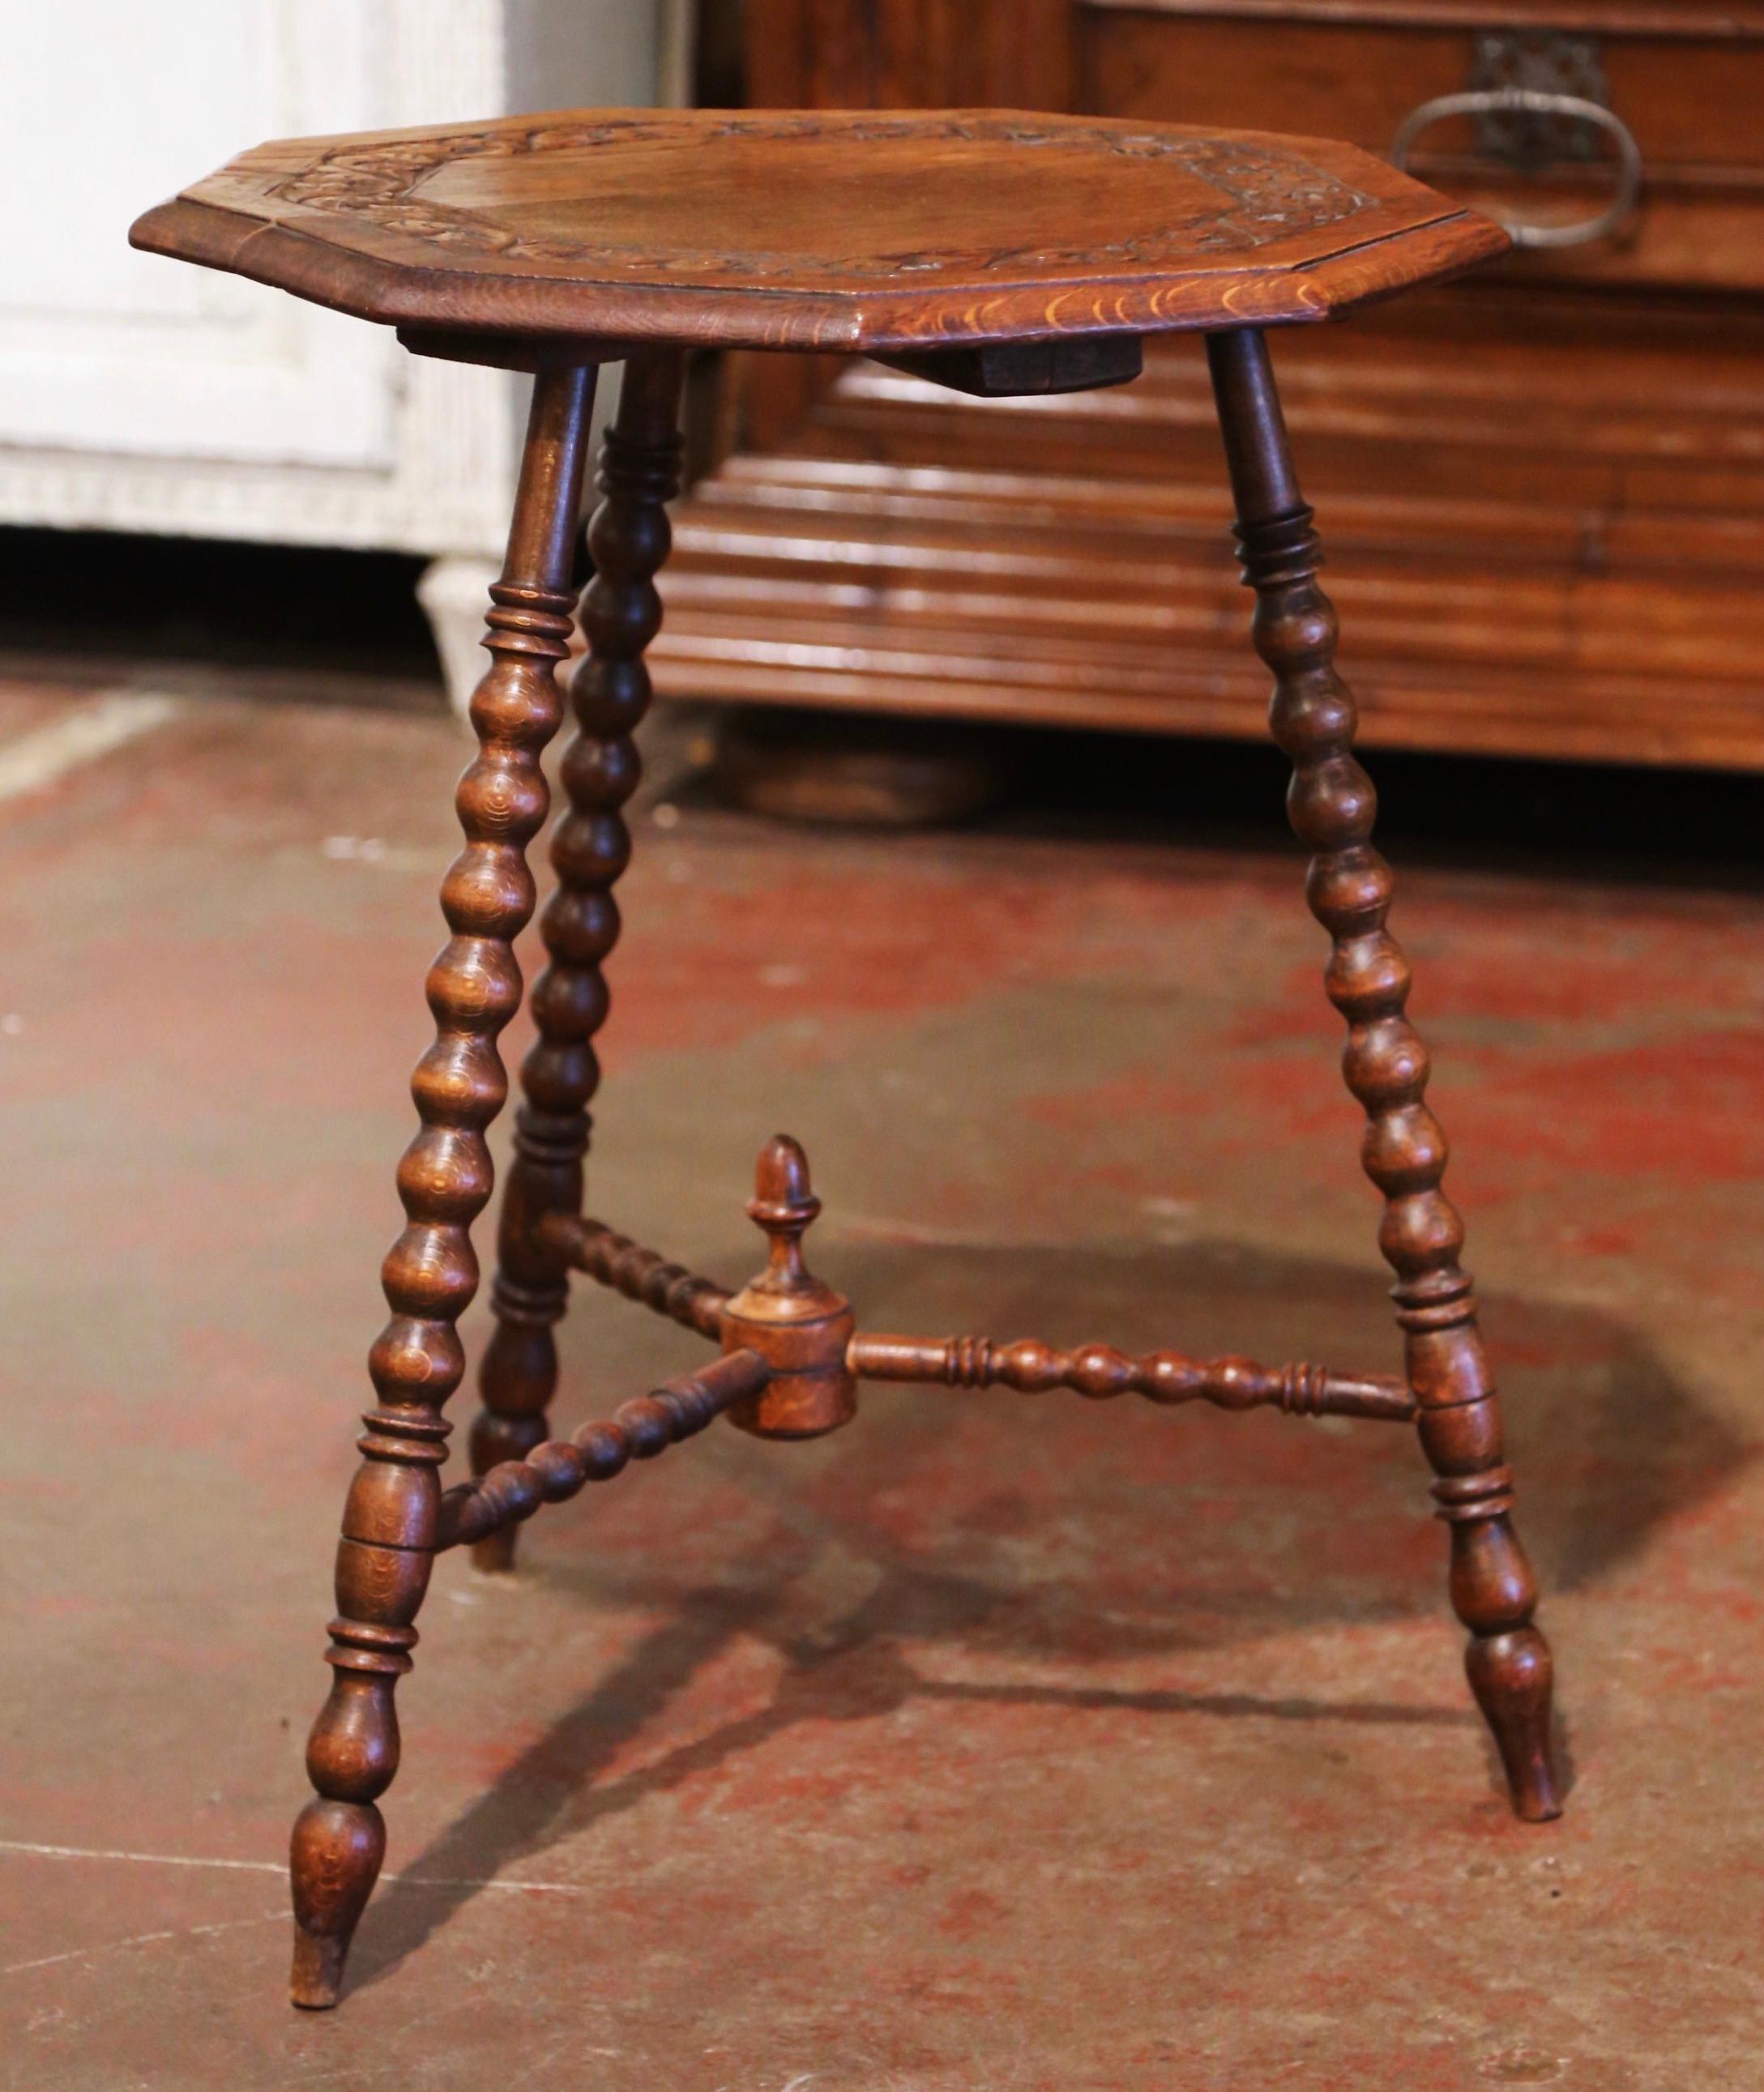 Decorate a den or living room with this antique cricket table. Crafted in England circa 1880 and built of oak, the side table stands on three turned legs decorated with a bottom stretcher embellished with a central finial. The polygon top is